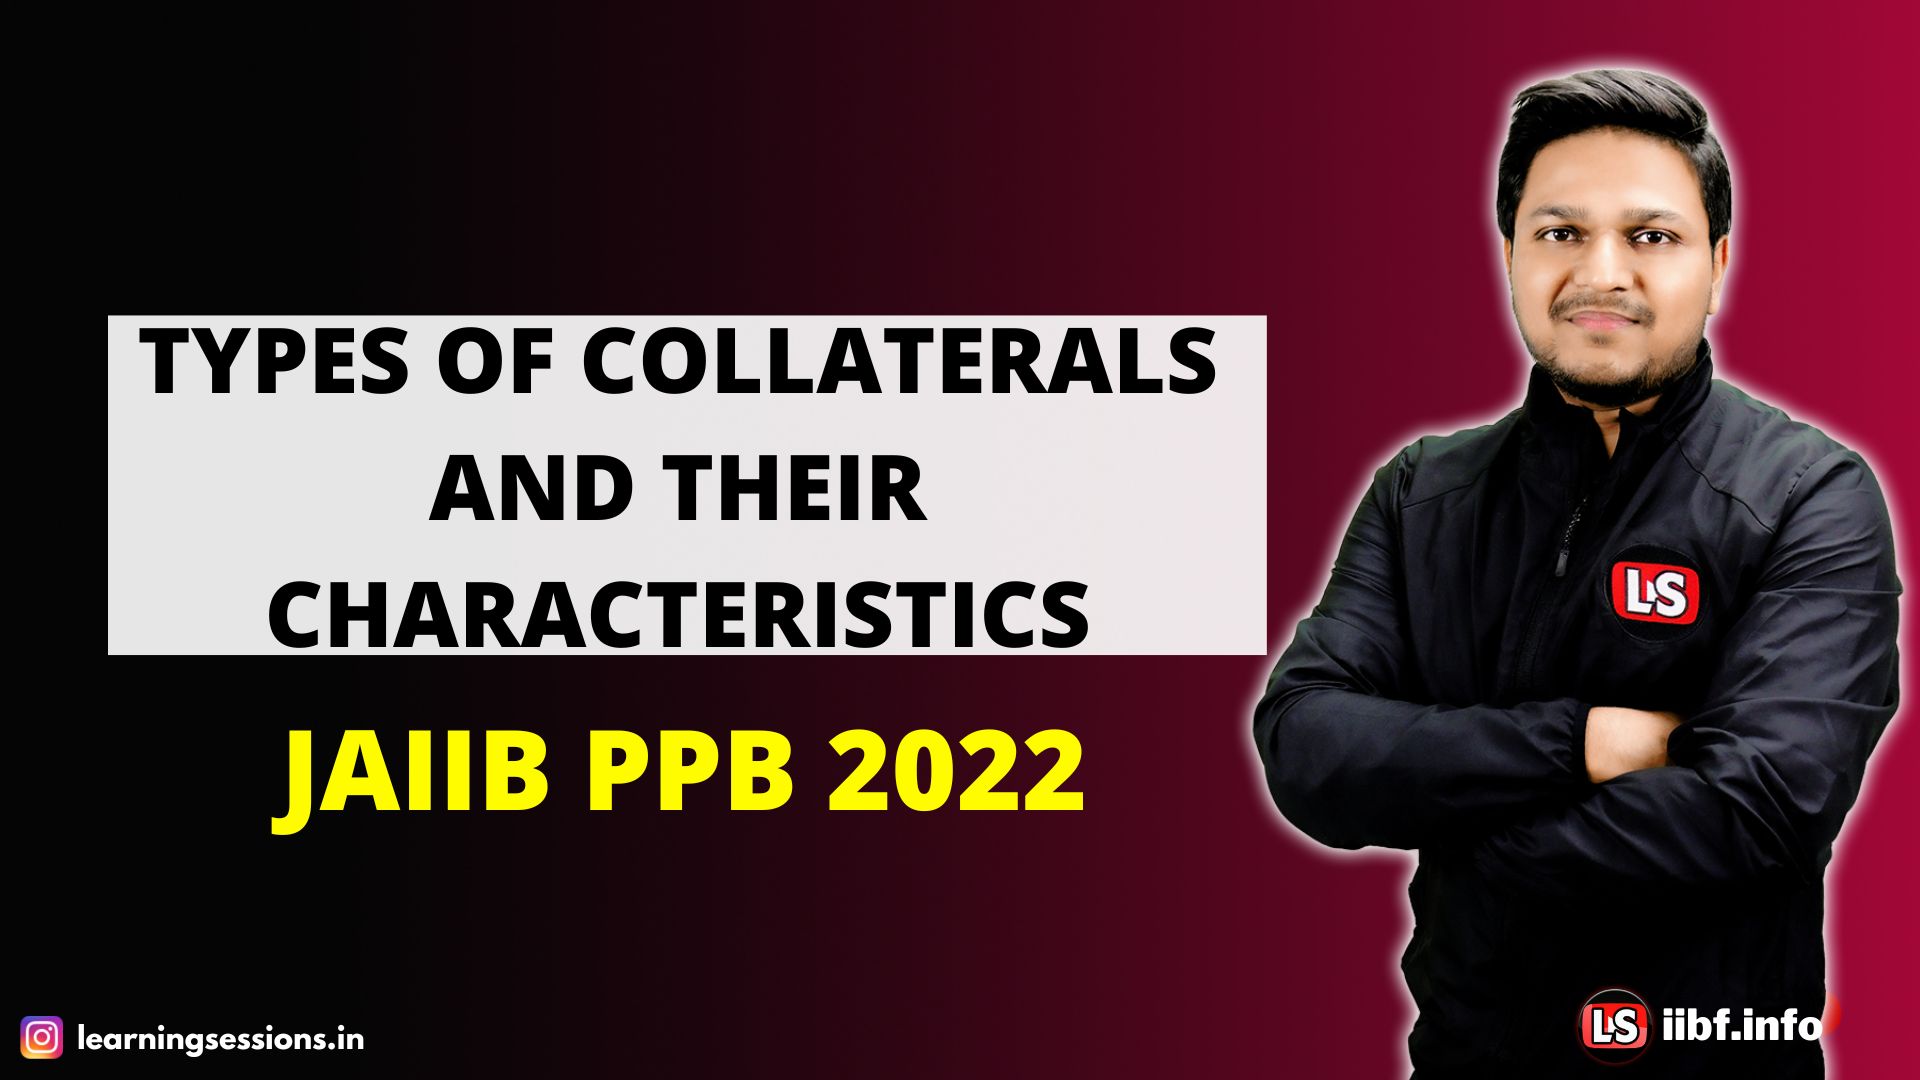 PPB FREE NOTES TO CRACK JAIIB 2022 | TYPES OF COLLATERALS AND THEIR CHARACTERISTICS | JAIIB 2022 SYLLABUS